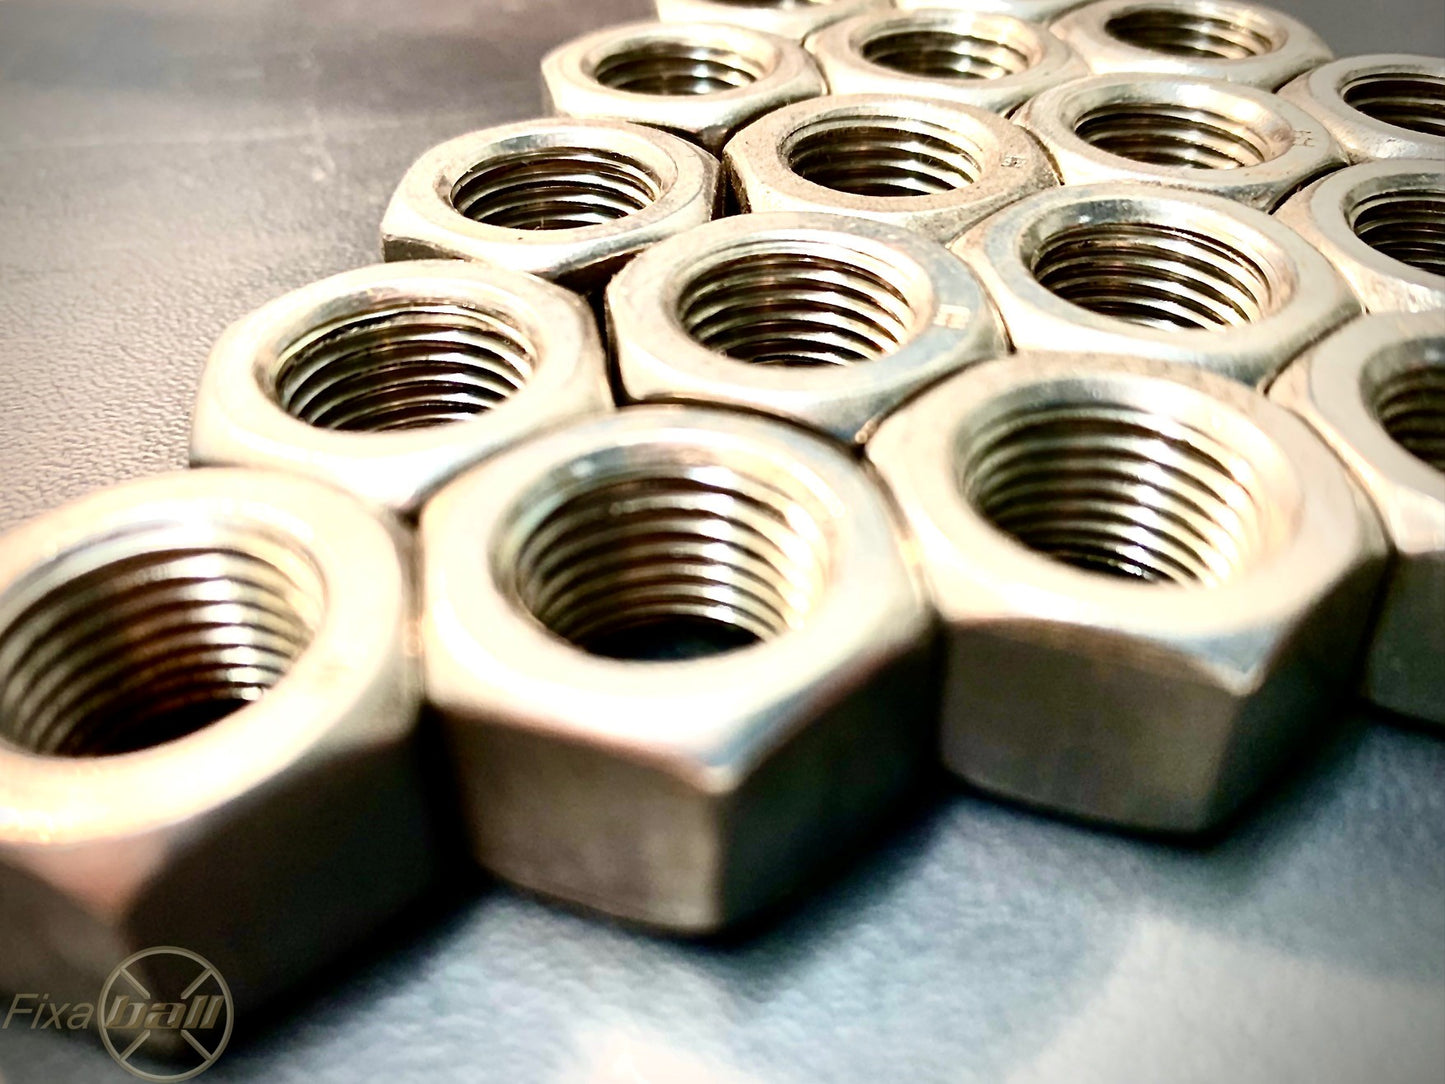 UNF, Full Hex Nut, A2-70/ 304 Stainless Steel, DIN 934. Nuts UNF, Full Hex Nut, A2-70/ 304 Stainless Steel, DIN 934. Full Nuts